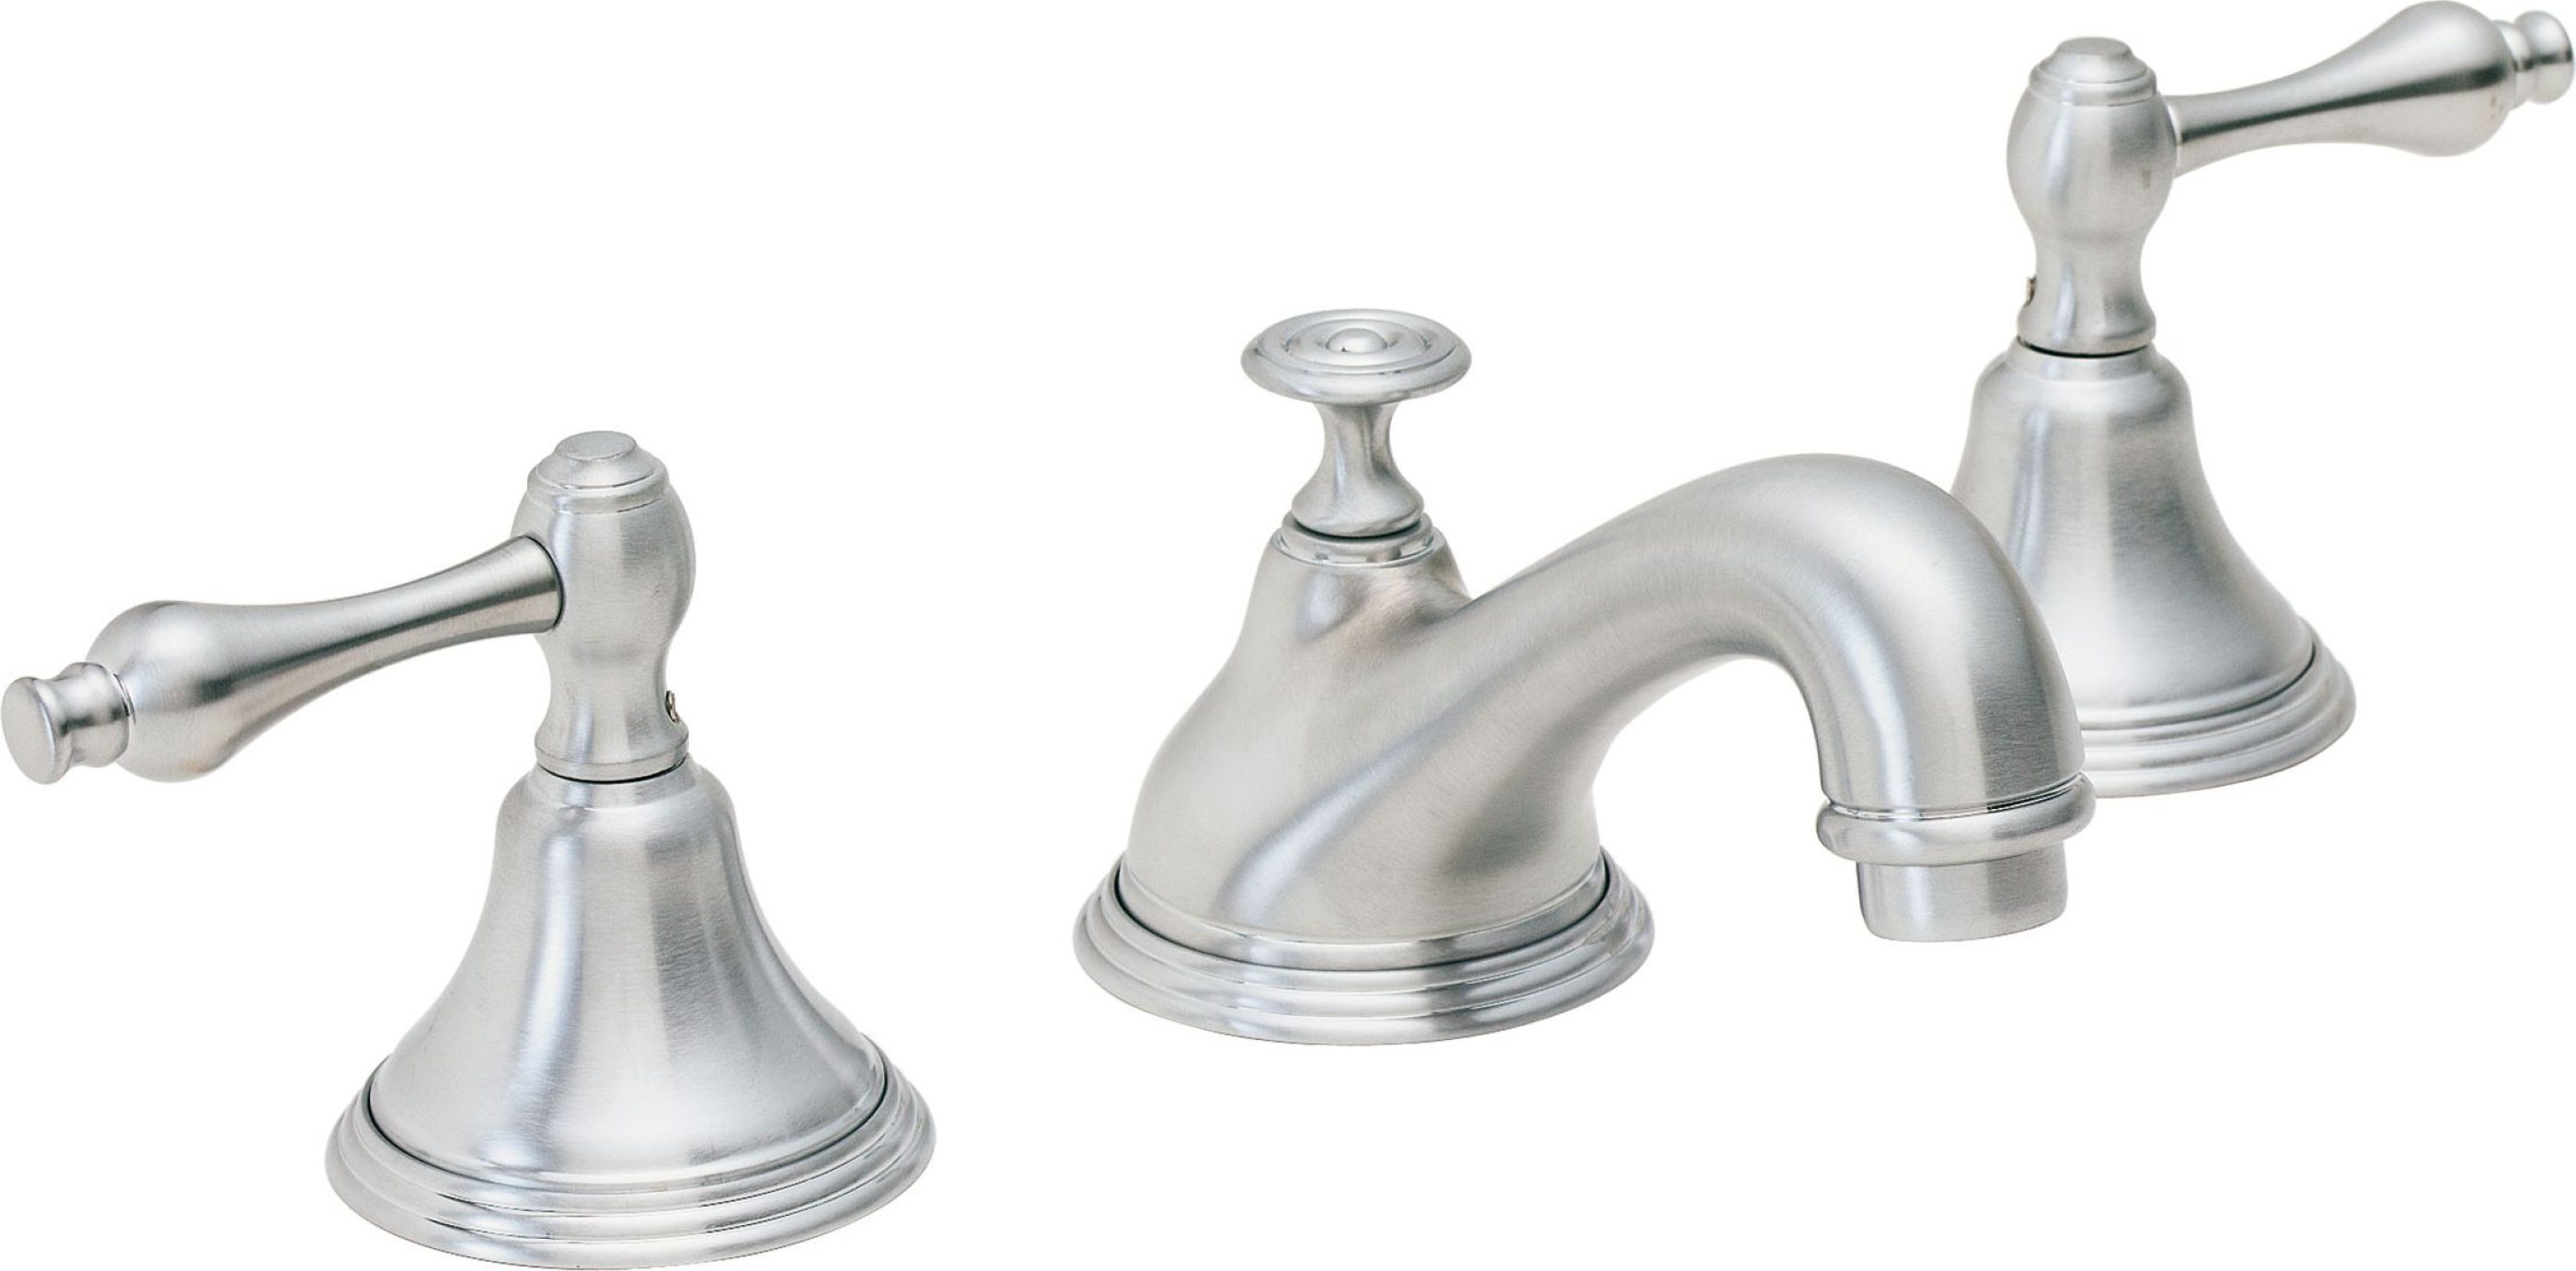 8" Widespread Lavatory Faucet   4202   California Faucets